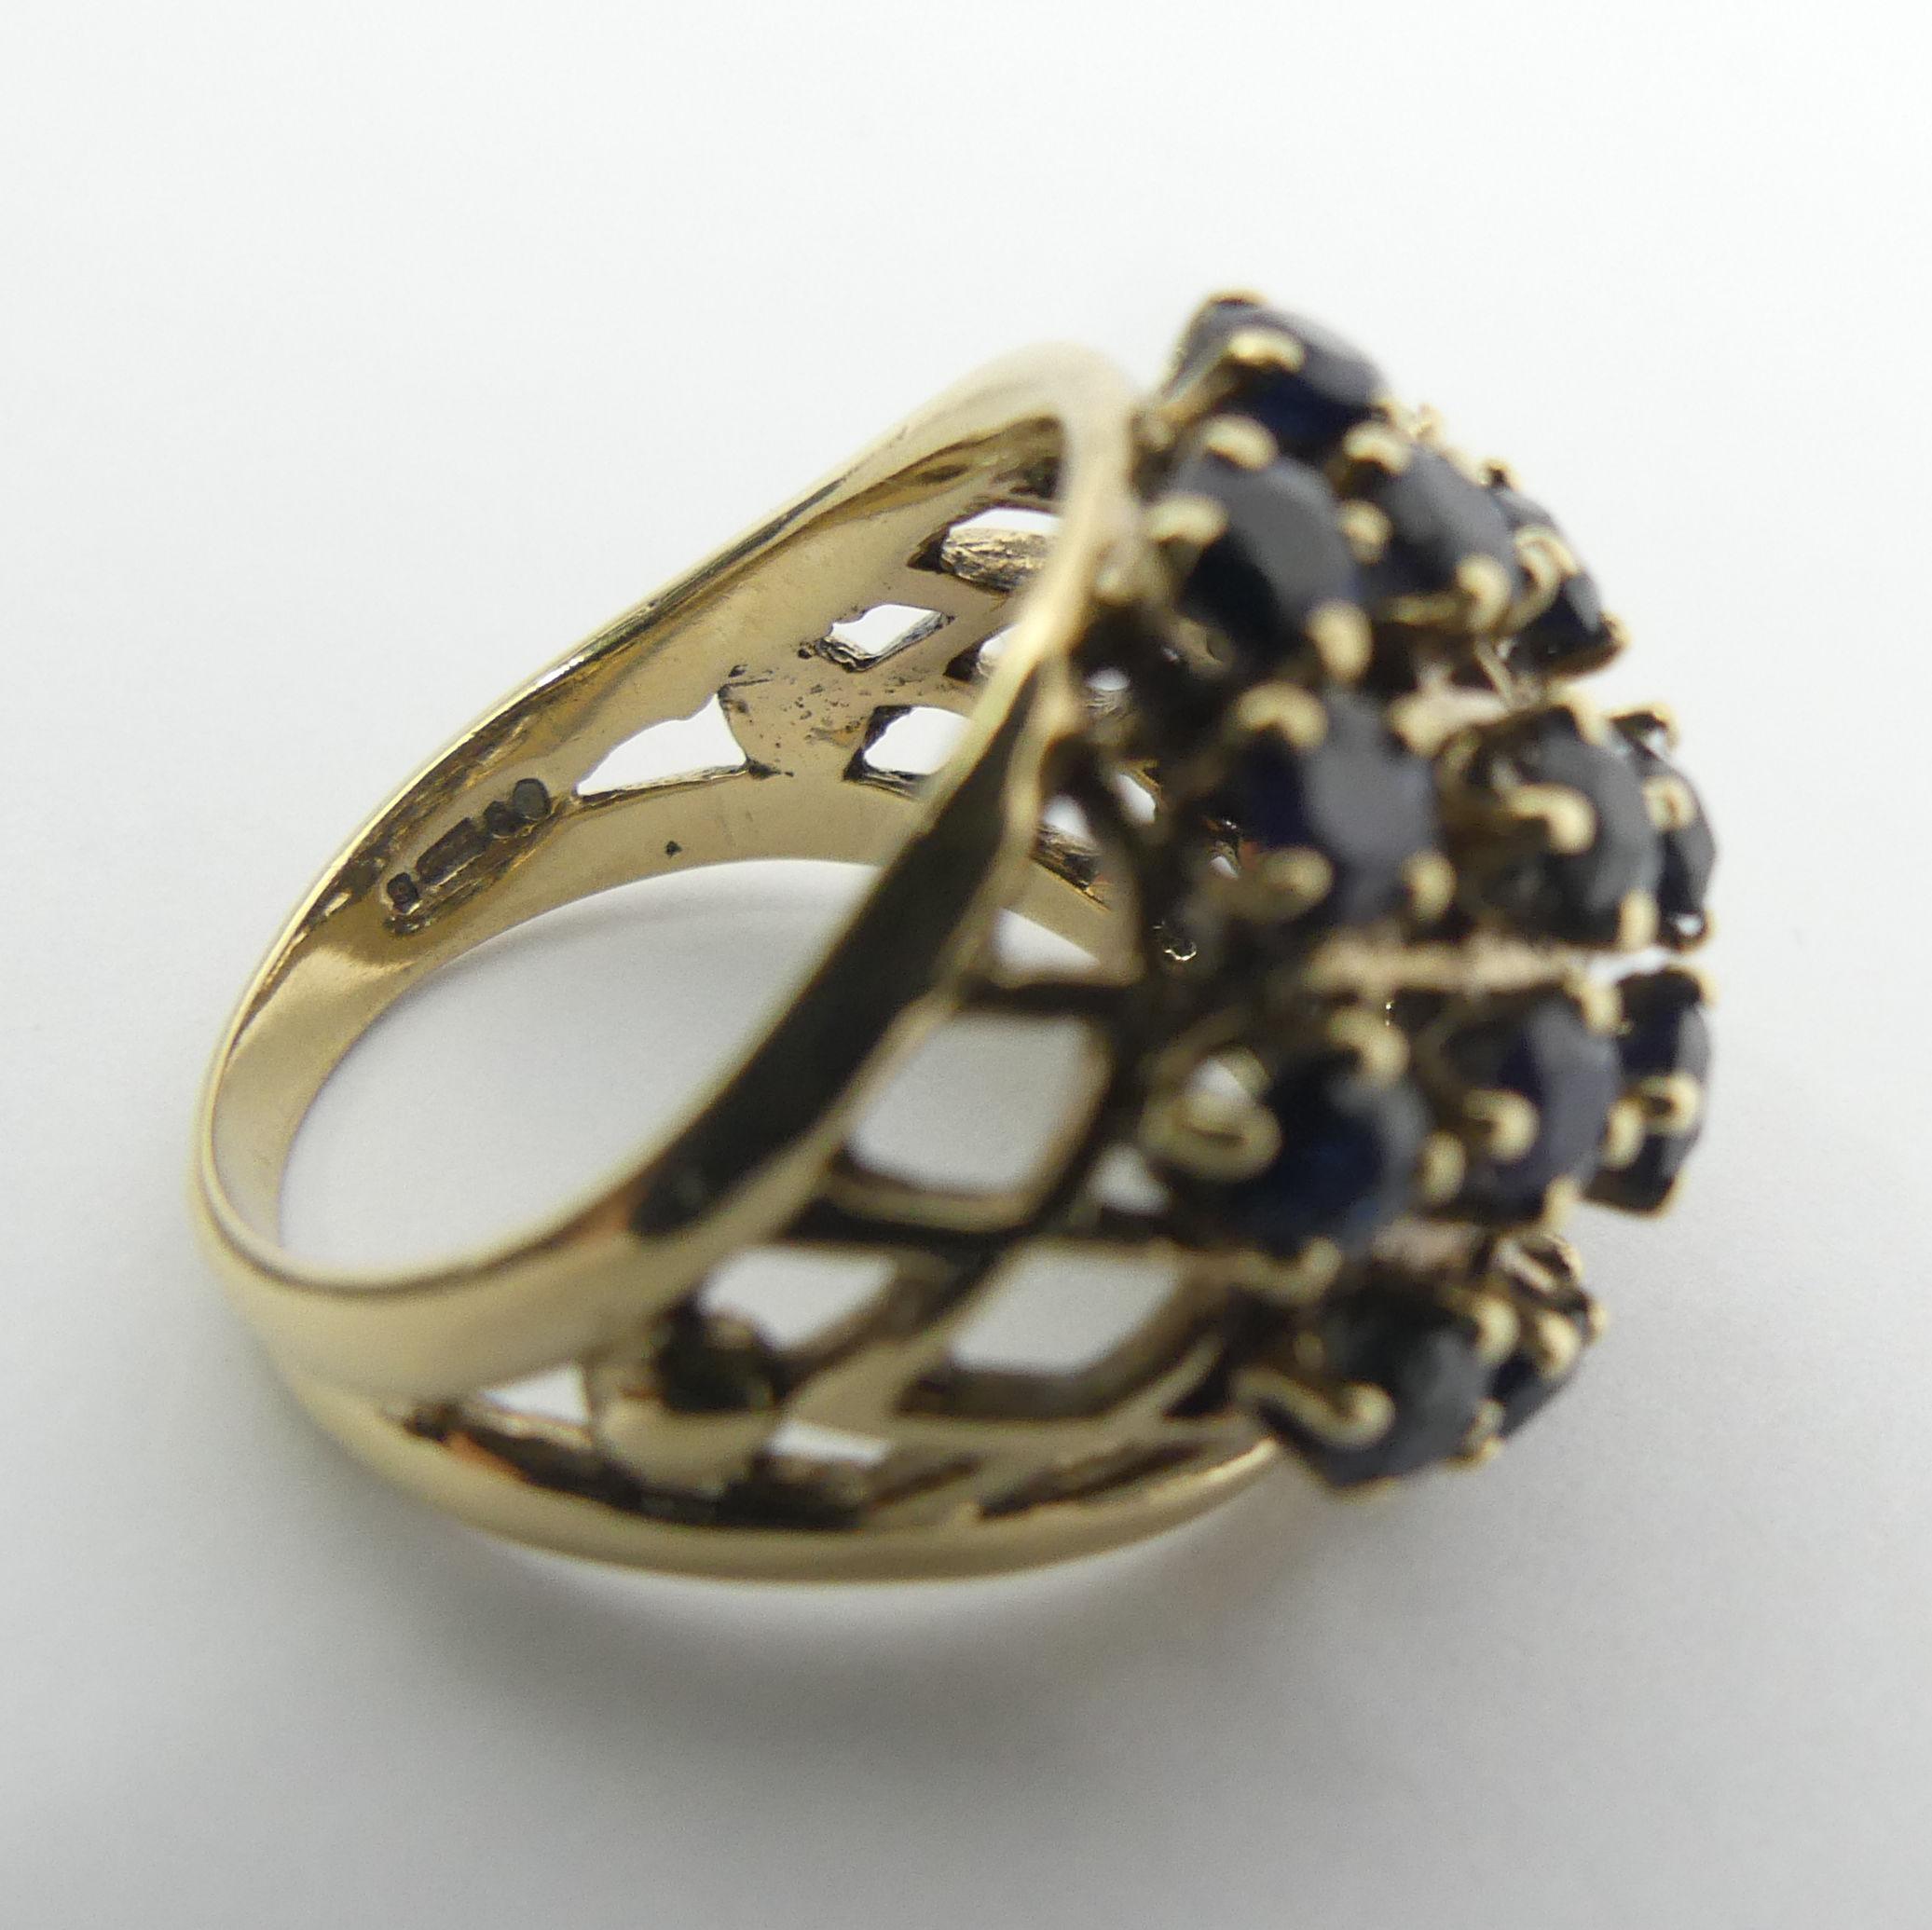 9ct gold sapphire bombe design ring, 7.5 grams, Birm.1963. Size M, 18.5 mm. UK Postage £12. - Image 5 of 5